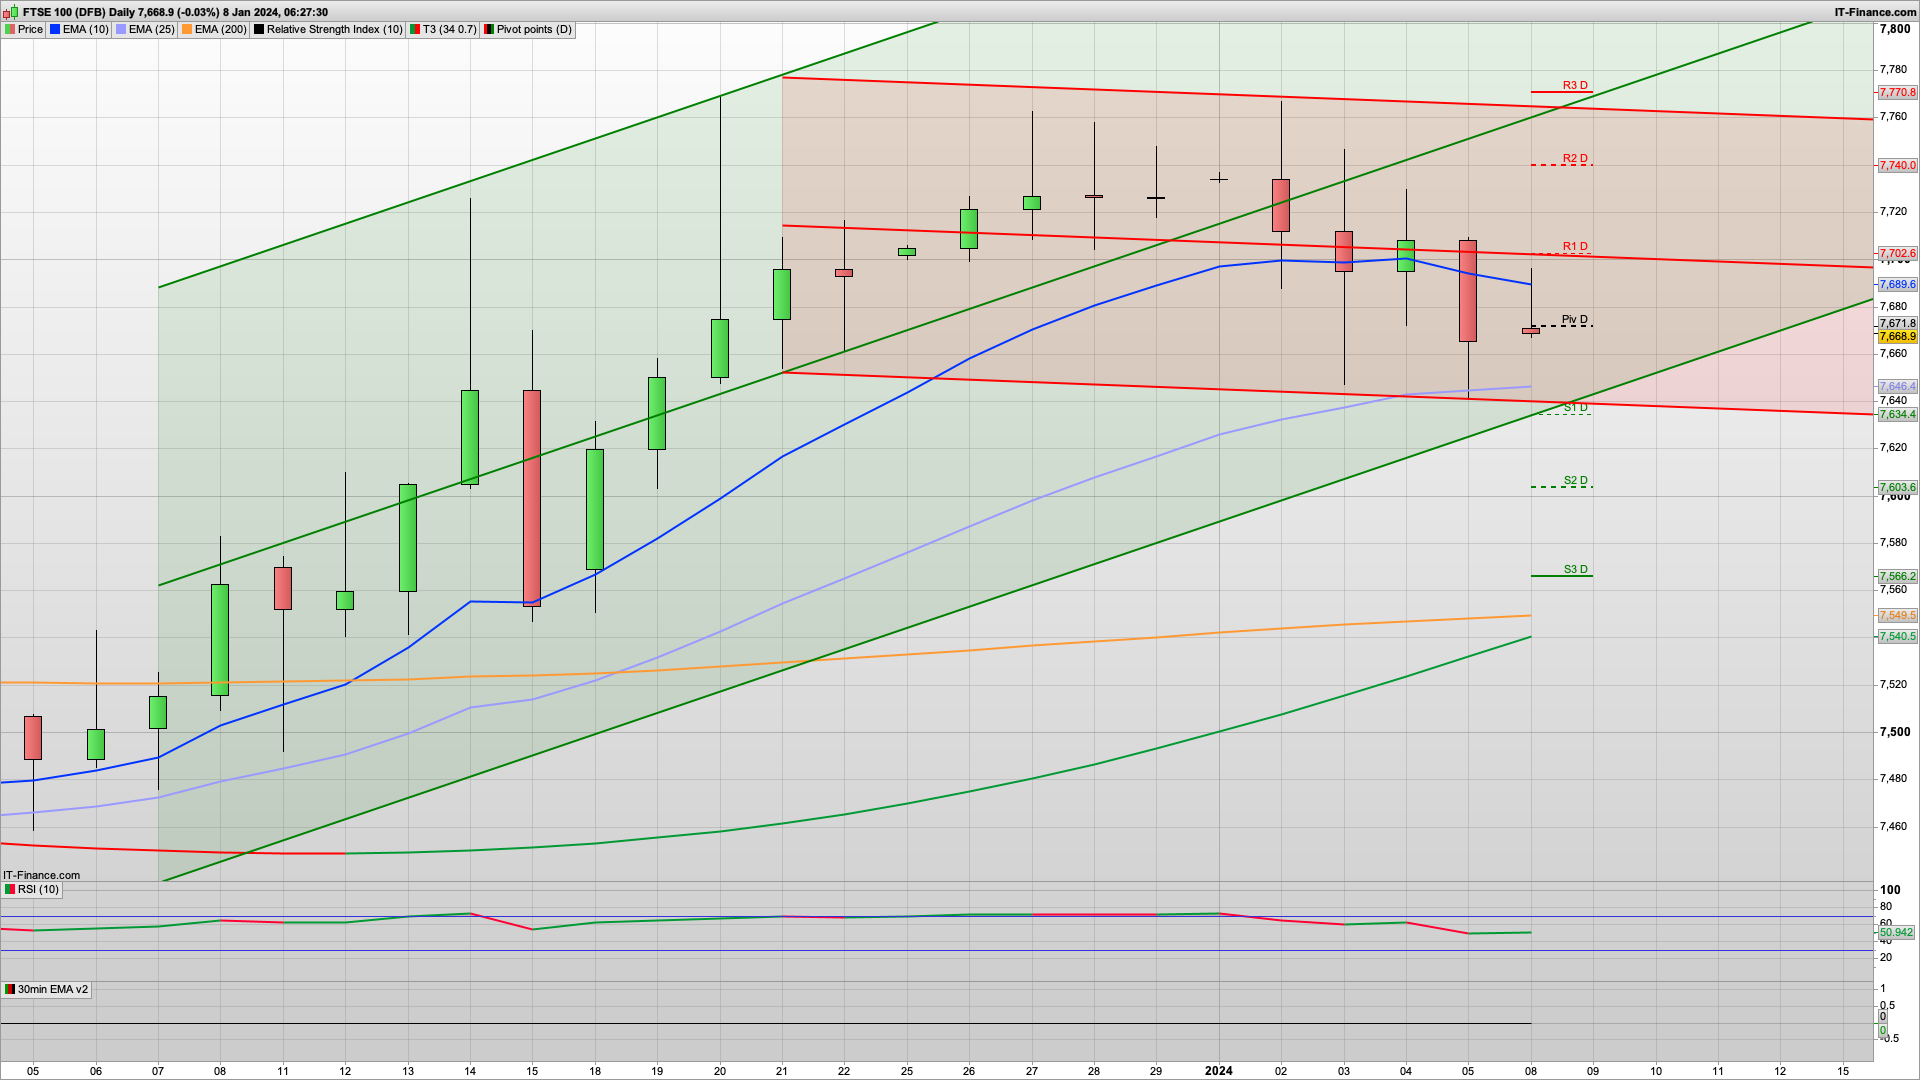 Bulls will want to defend 7640 | 7615 below | 7692 7728 7765 resistance